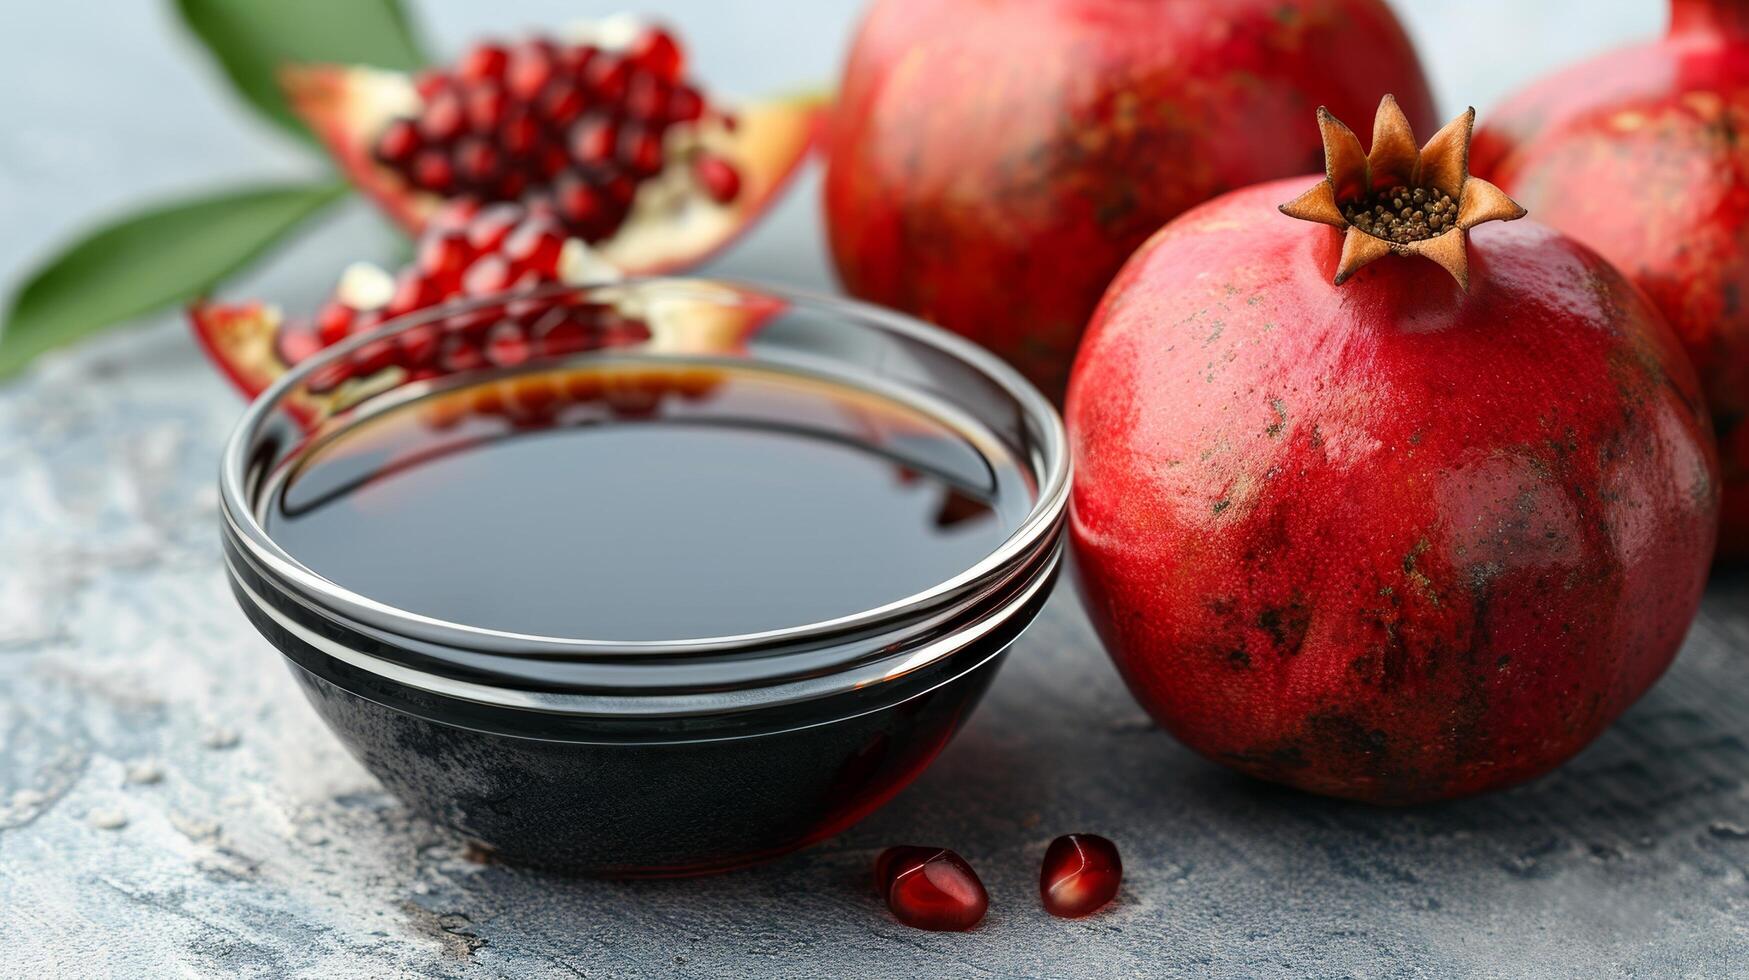 Pomegranate molasses and sour sauce with ripe fruit on table, whole and split pomegranate photo